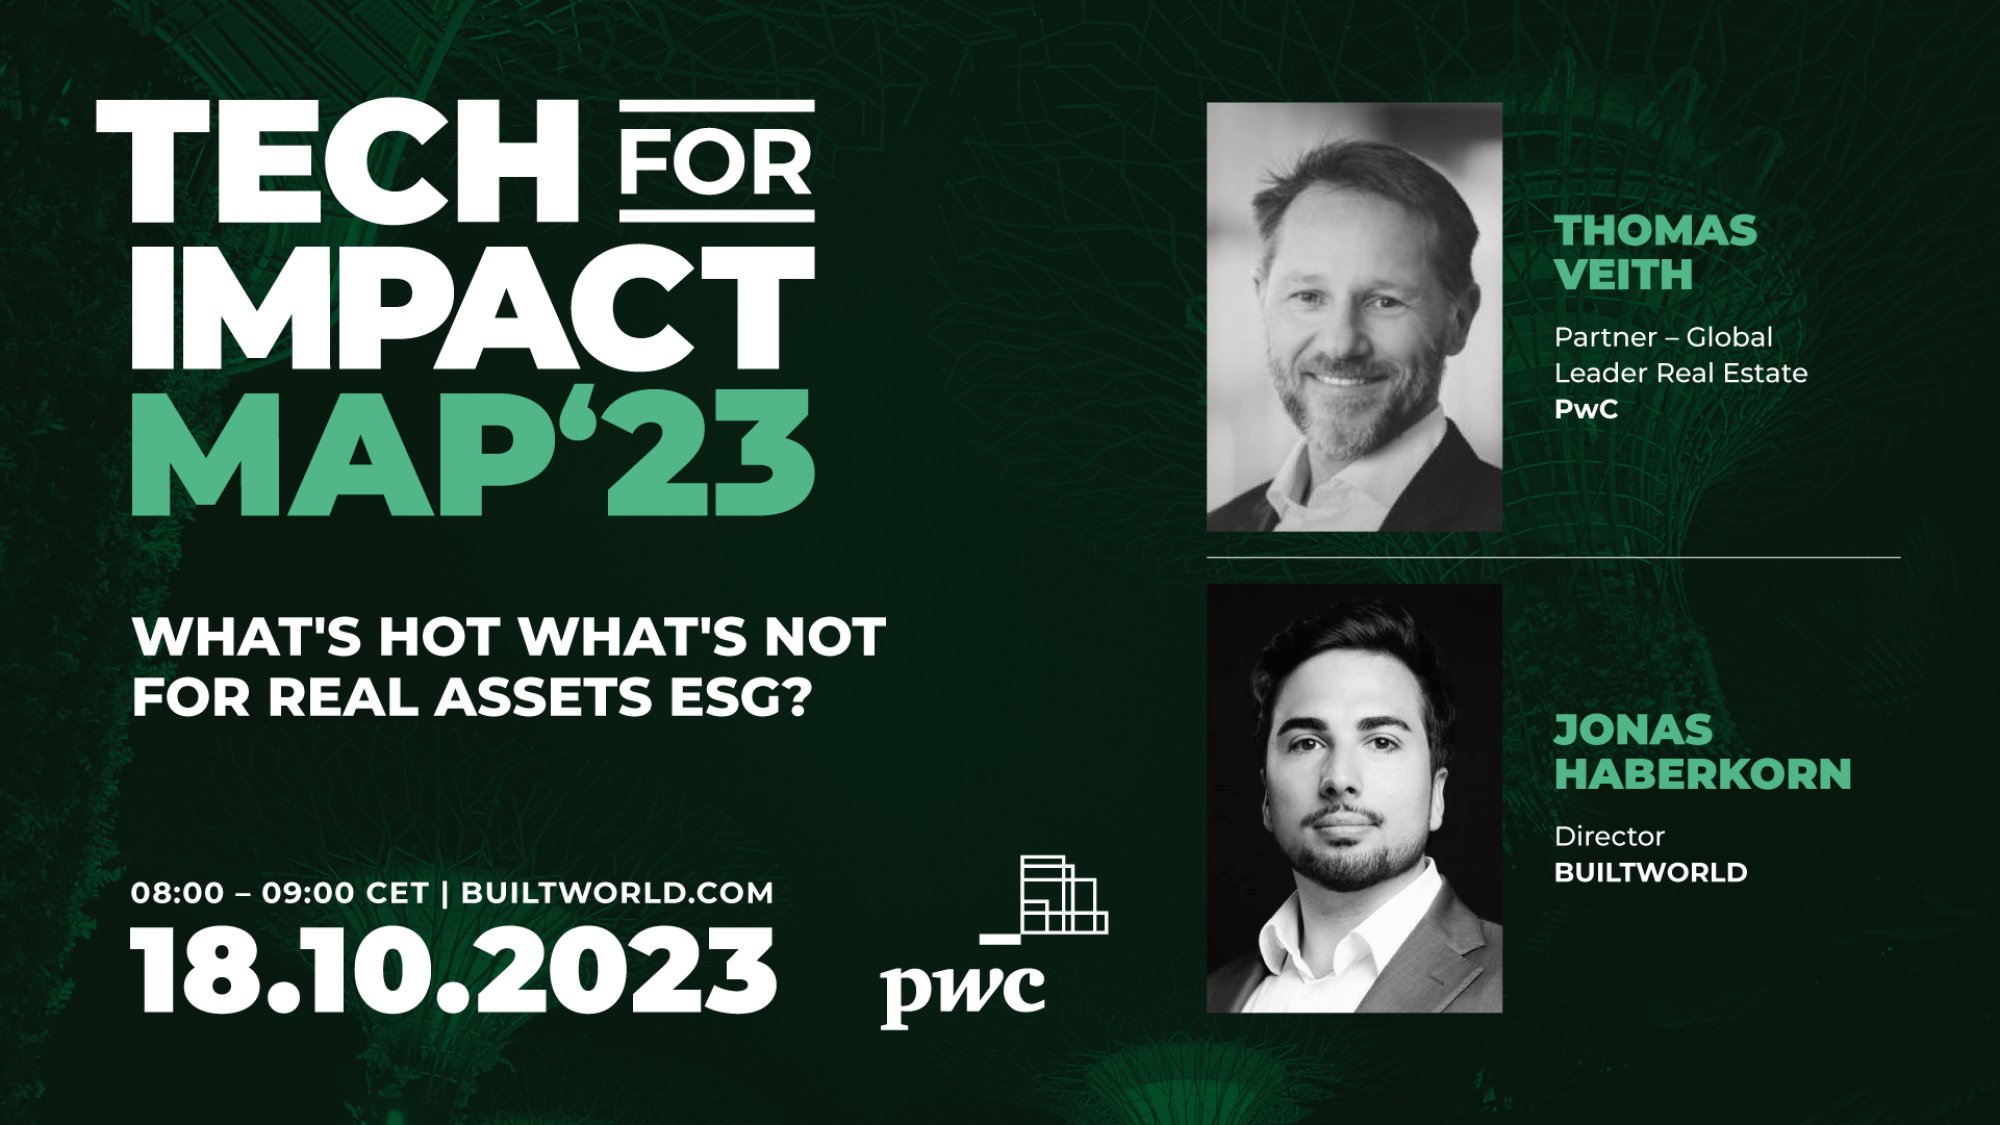 tech-for-impact-map-2023-real-assets-esg-technologie